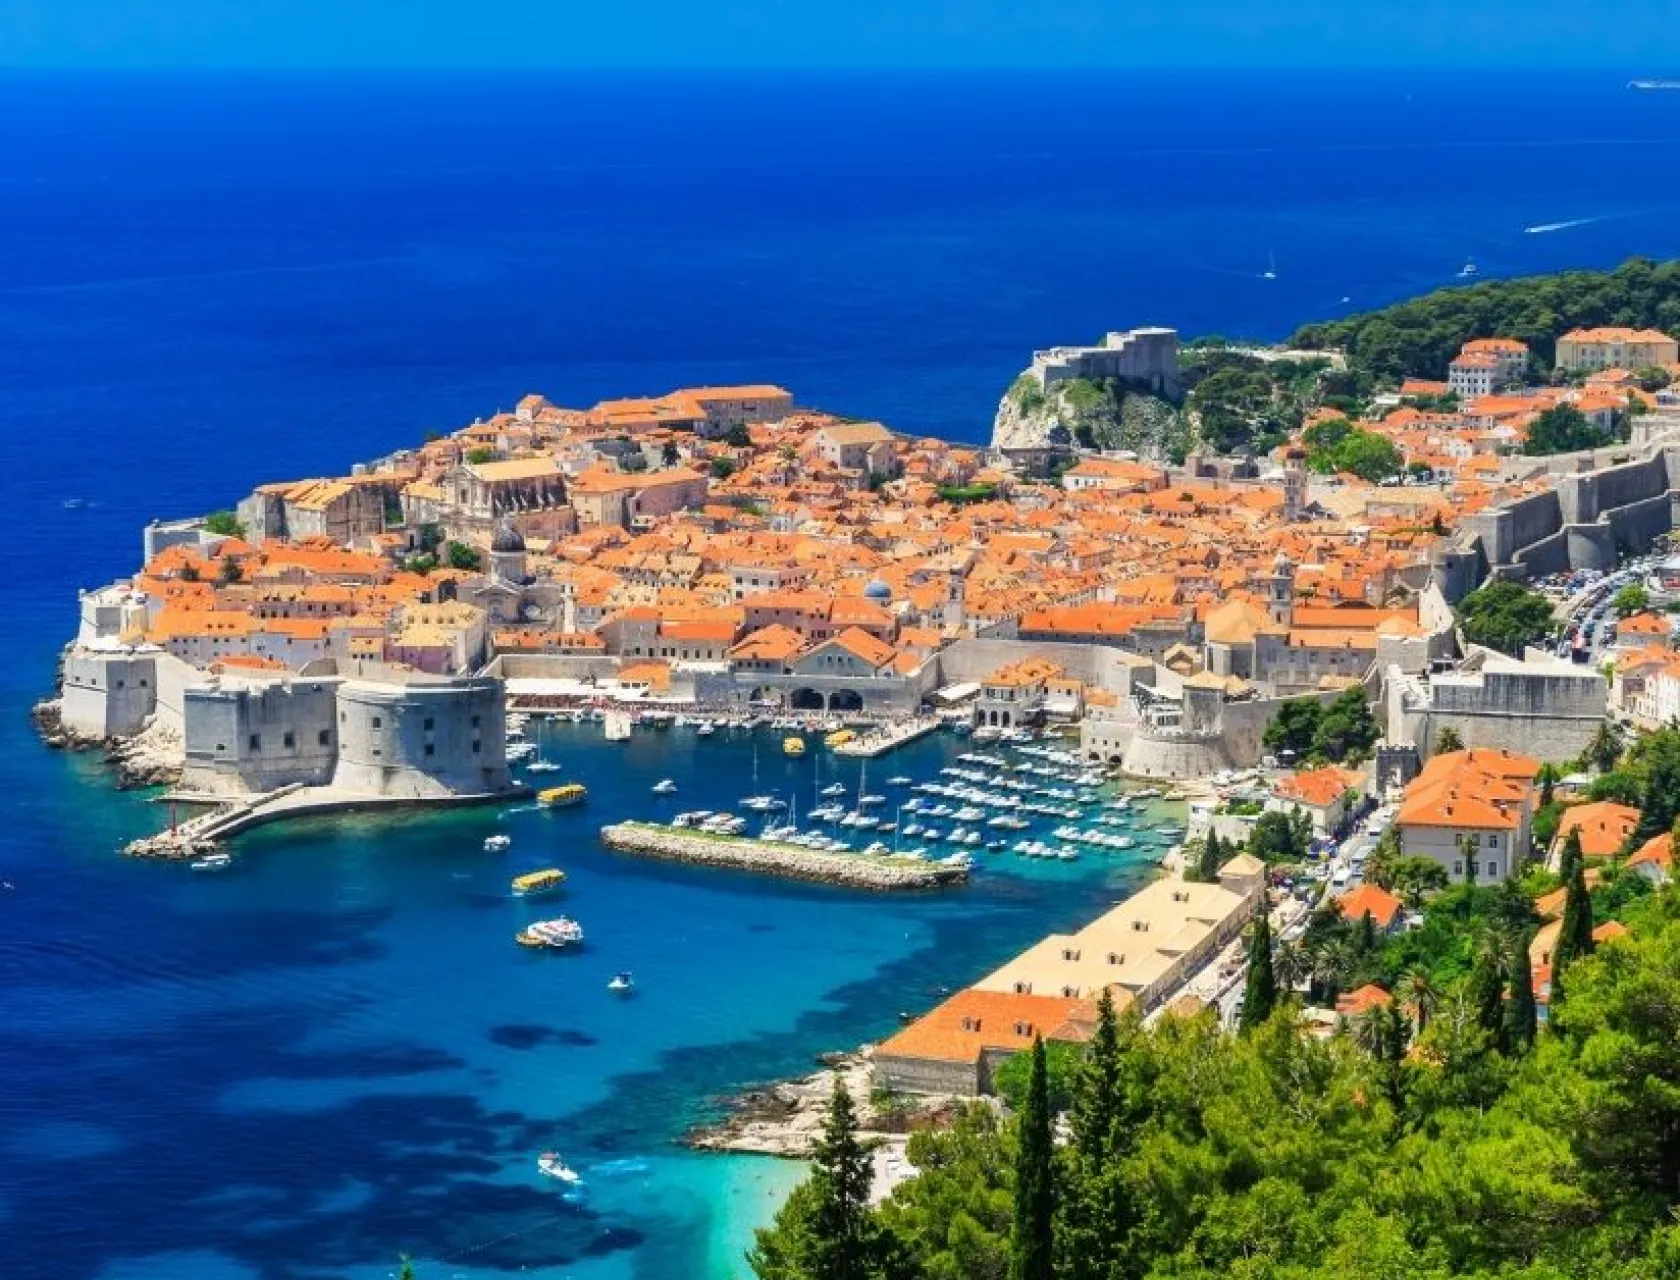 A panoramic view of the walled city Dubrovnik Croatia 824-1024